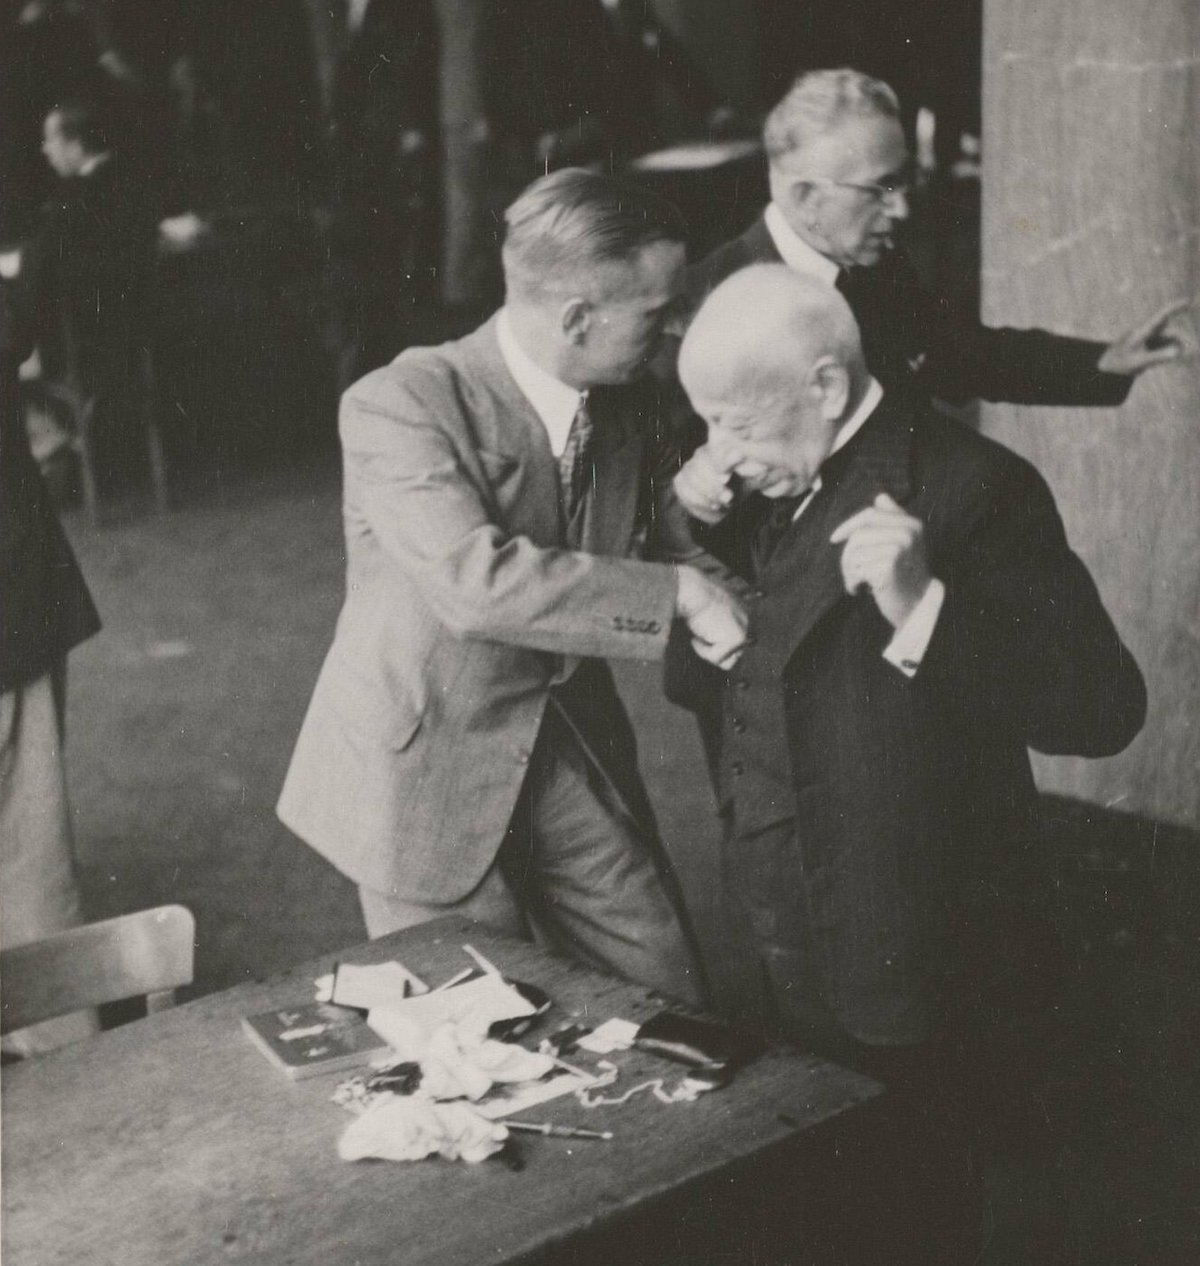 Jewish diamond merchants being searched at the Diamond Exchange, Amsterdam by order of the SS Devisenschutzkommando, 16 April 1942. Bart de Kok/Amsterdam City Archives OKBB00024000039.